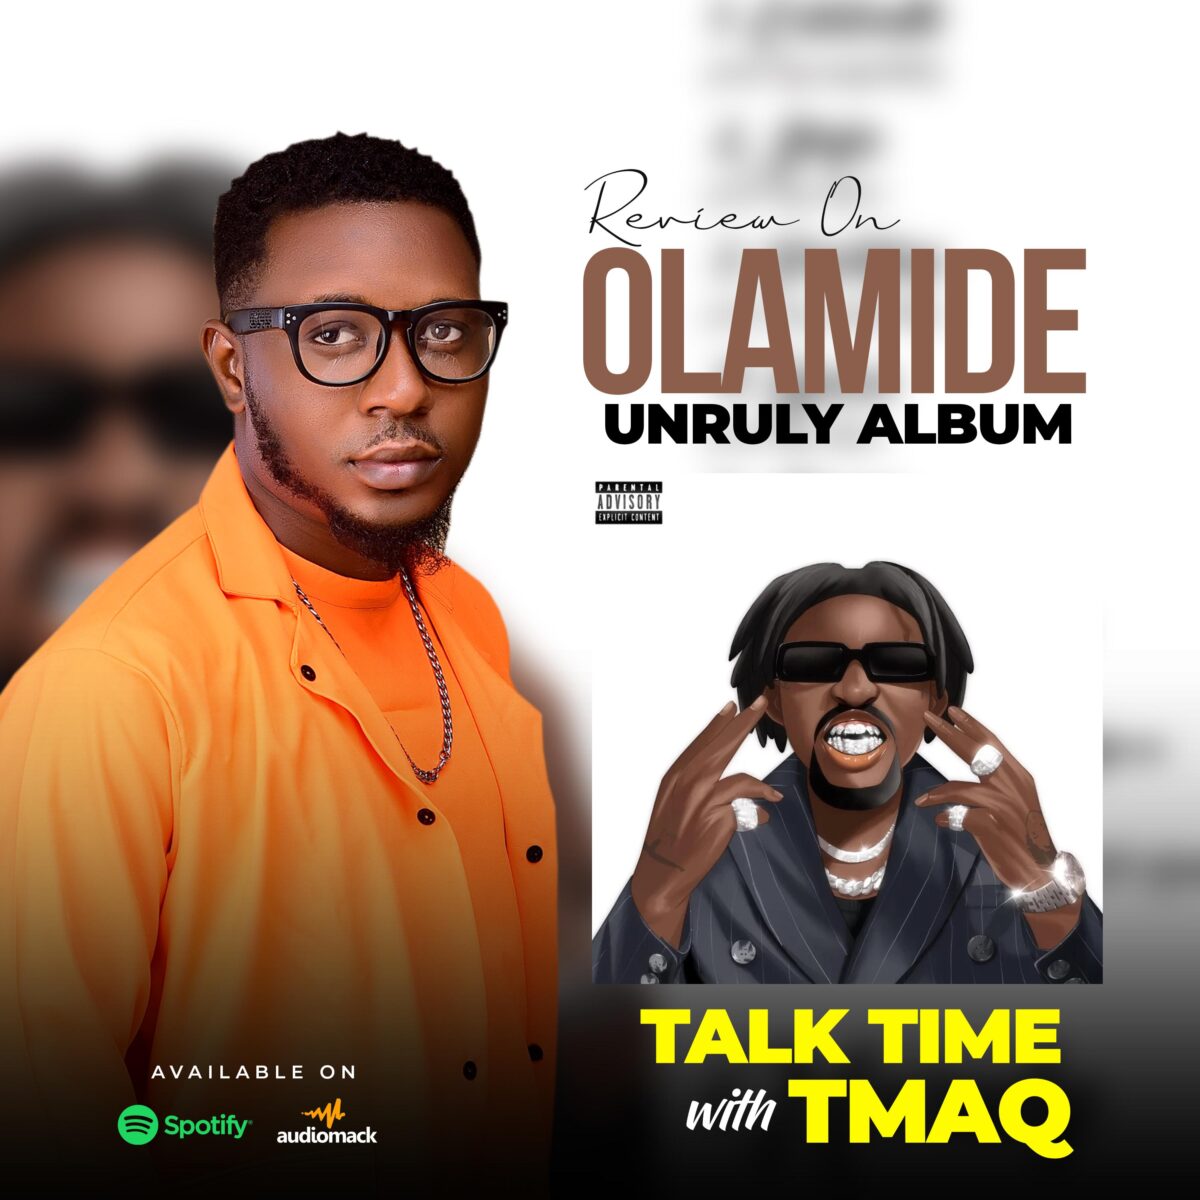 Talk Time With Tmaq - REVIEW OF Olamide Unruly Album